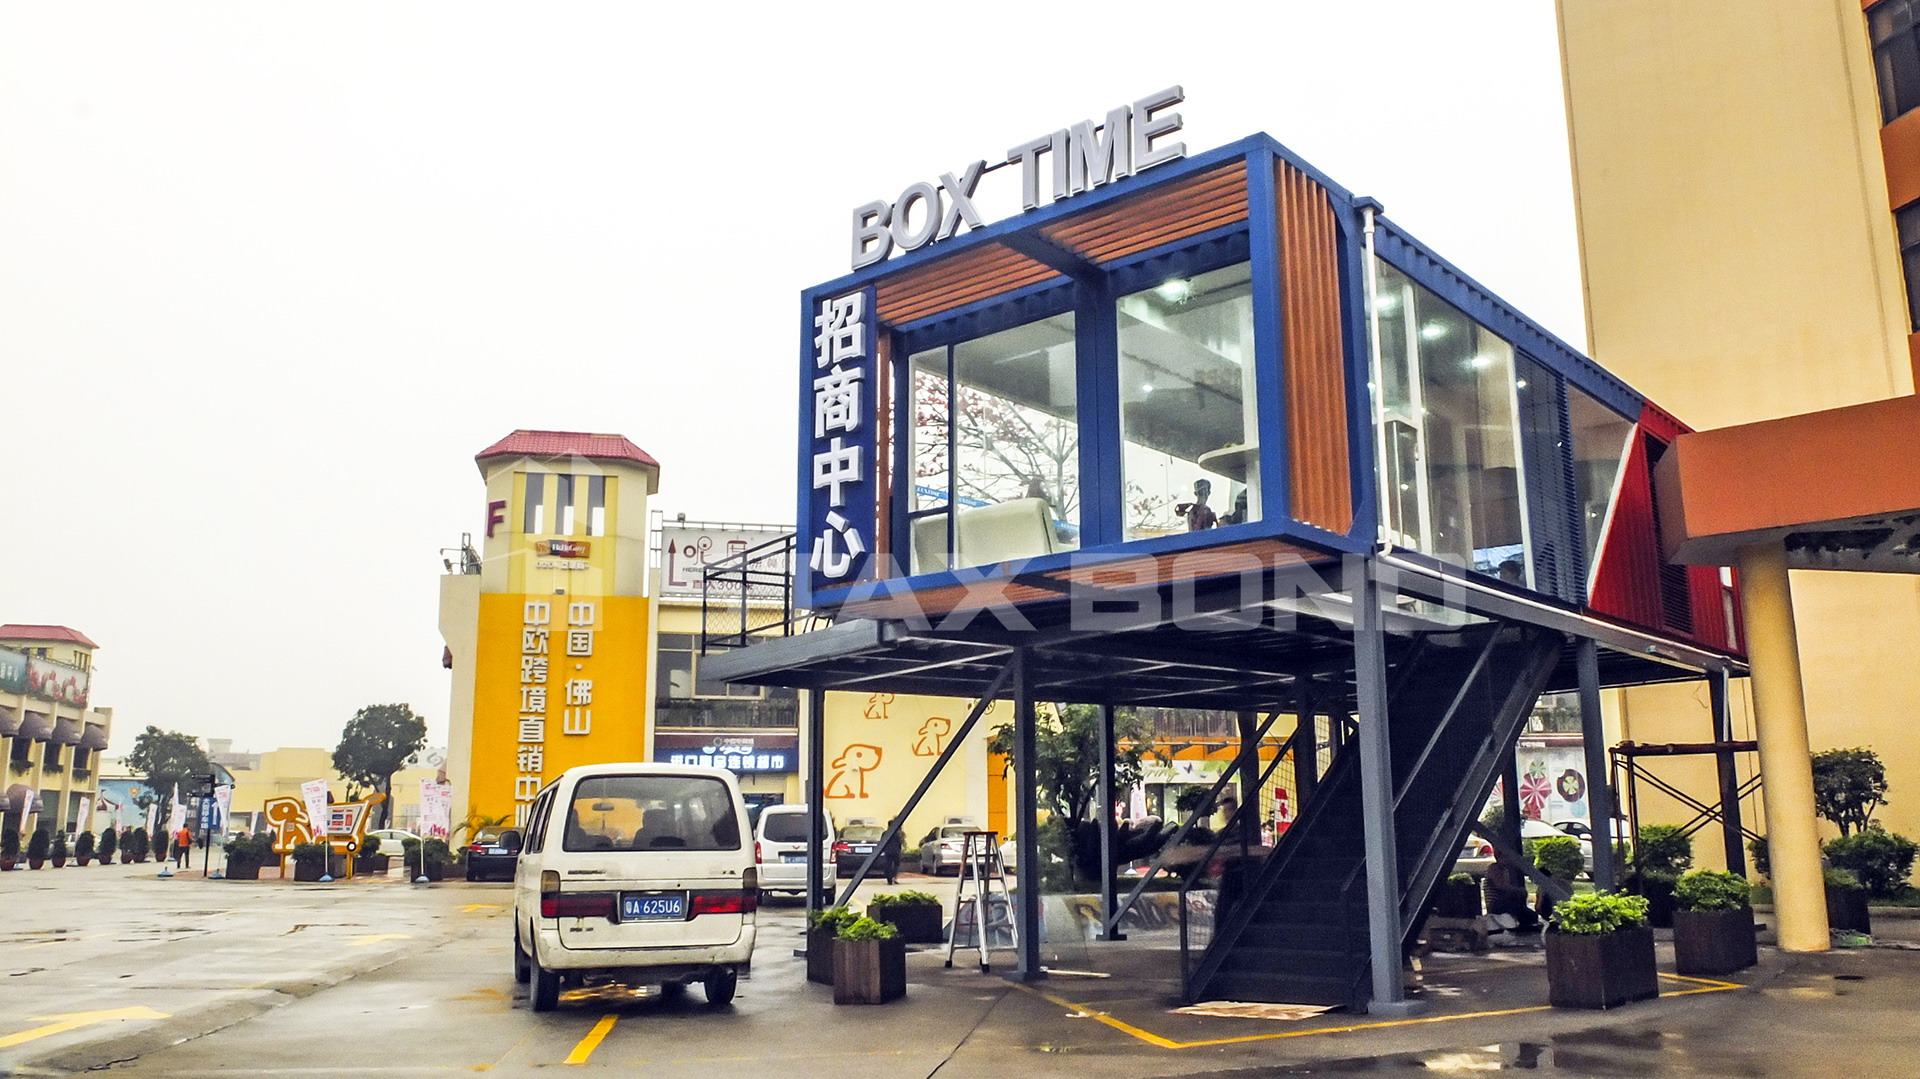 Zhongou Electric Mall Commercial Street,Container commercial street,creative container,container design,container shop,container market,container shopping mall,container restaurant,container cafe,container cultural and creative park,container display center